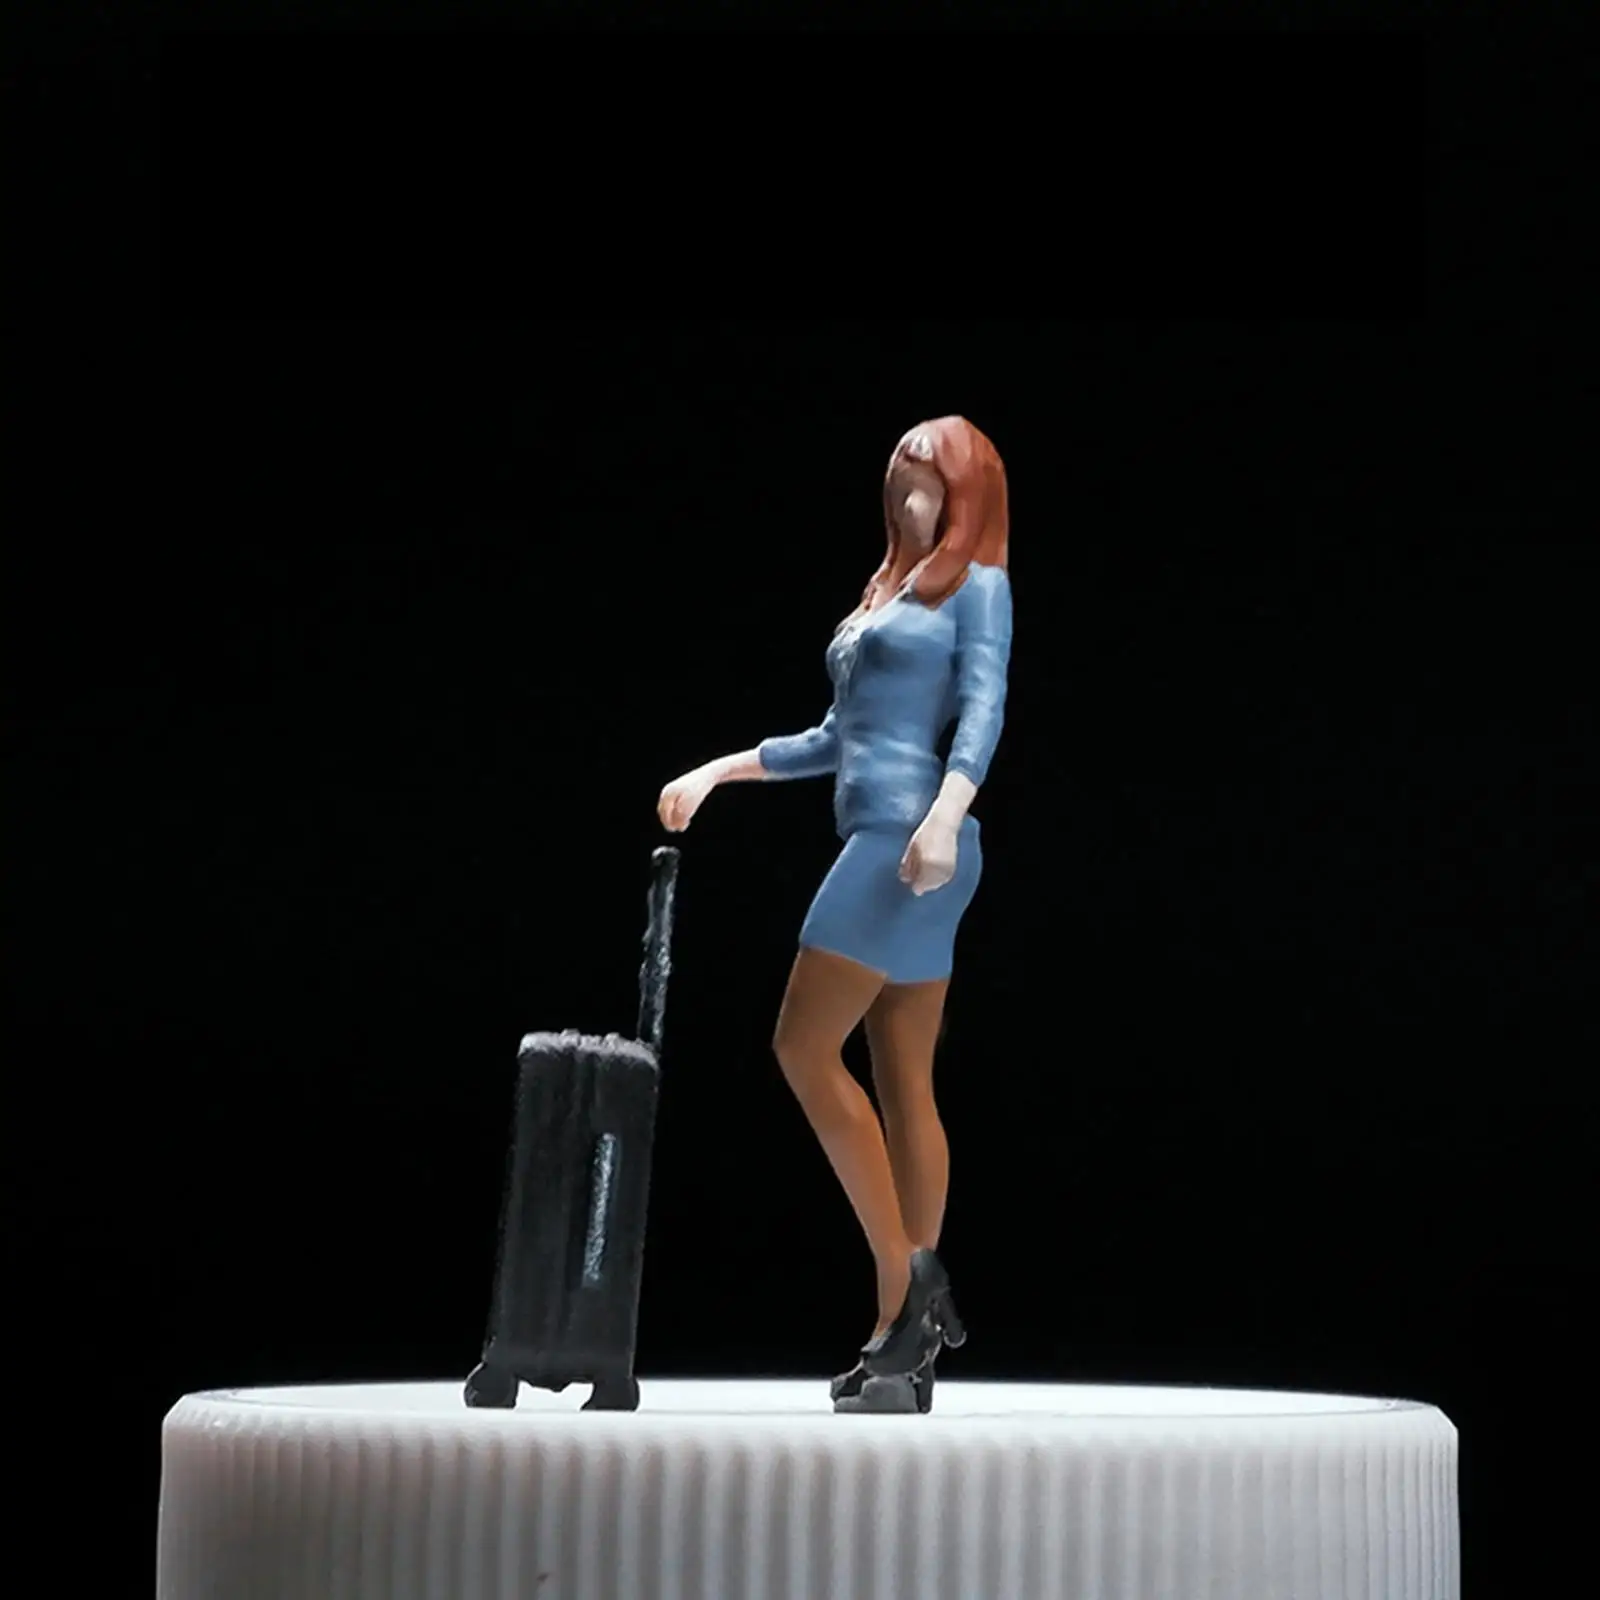 1:64 Scale Girl Figures with Suitcase Architectural Props Girl People Figurine Miniature Girls Model for Train Layout Sand Table